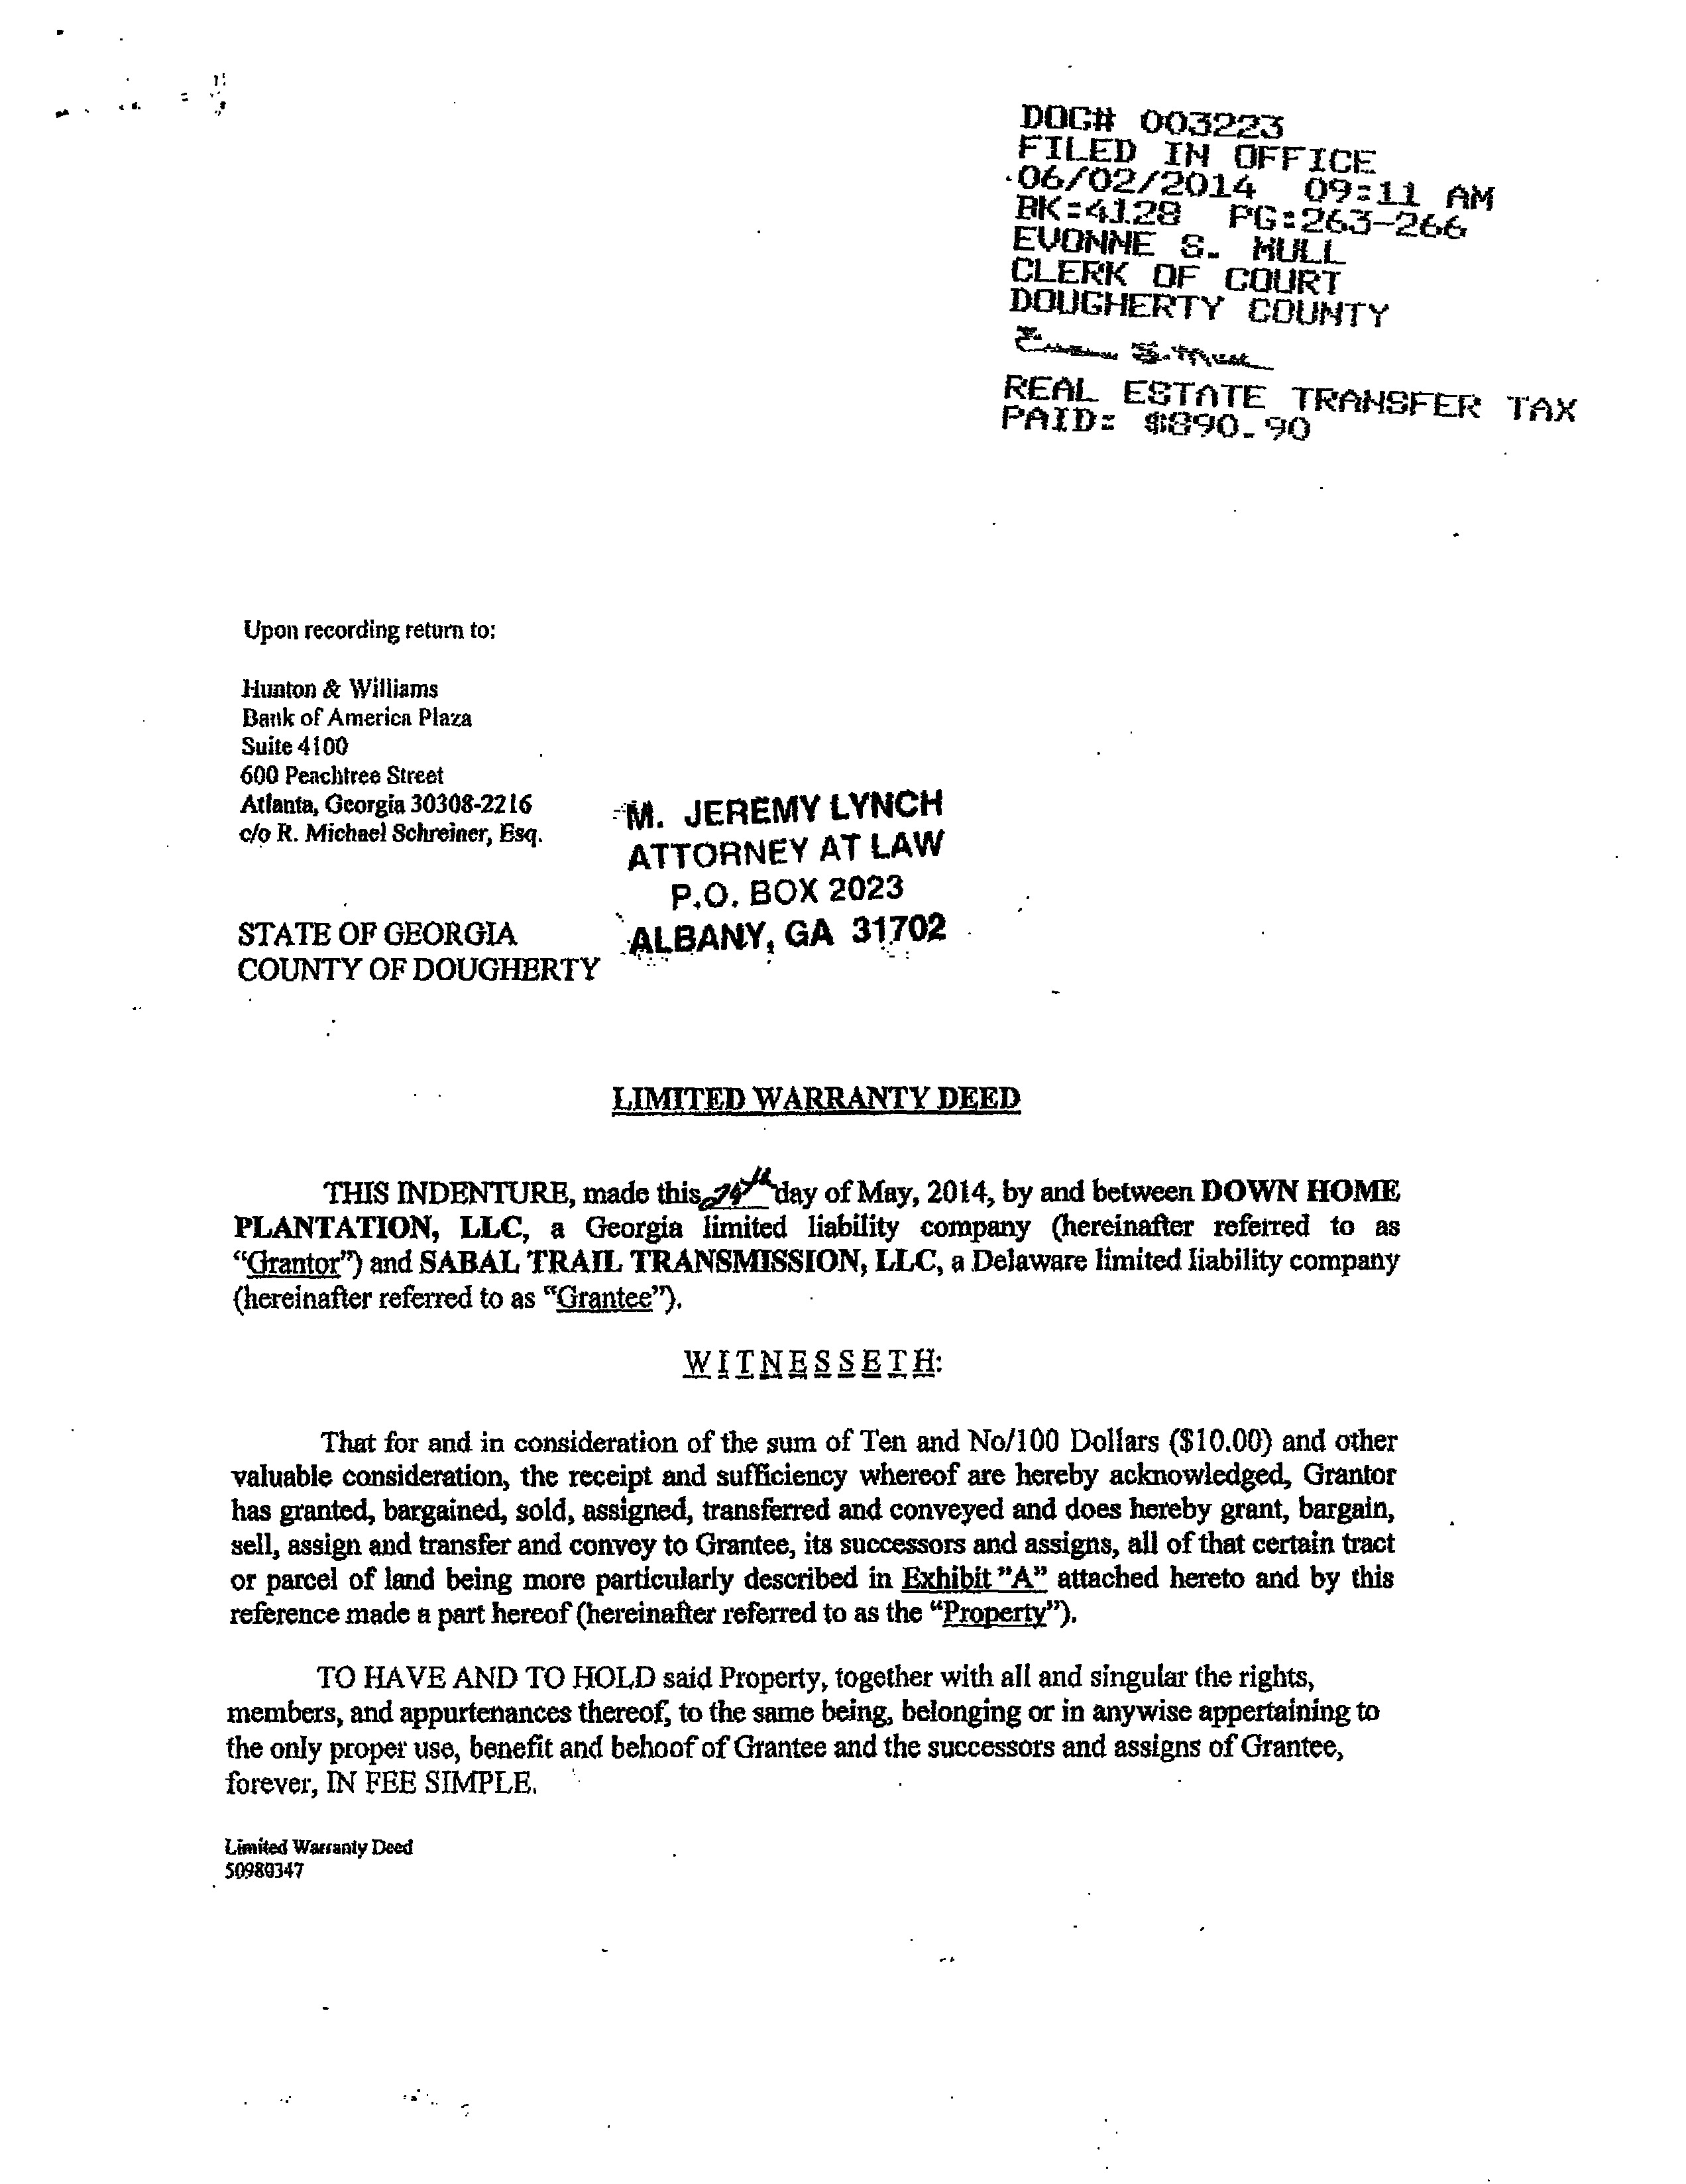 2544x3296 Page-08 Limited Warranty Deed, Down Home Plantation to Sabal Trail (1 of 5), in We grow increasingly concerned, by Dougherty County Commission, 25 August 2014